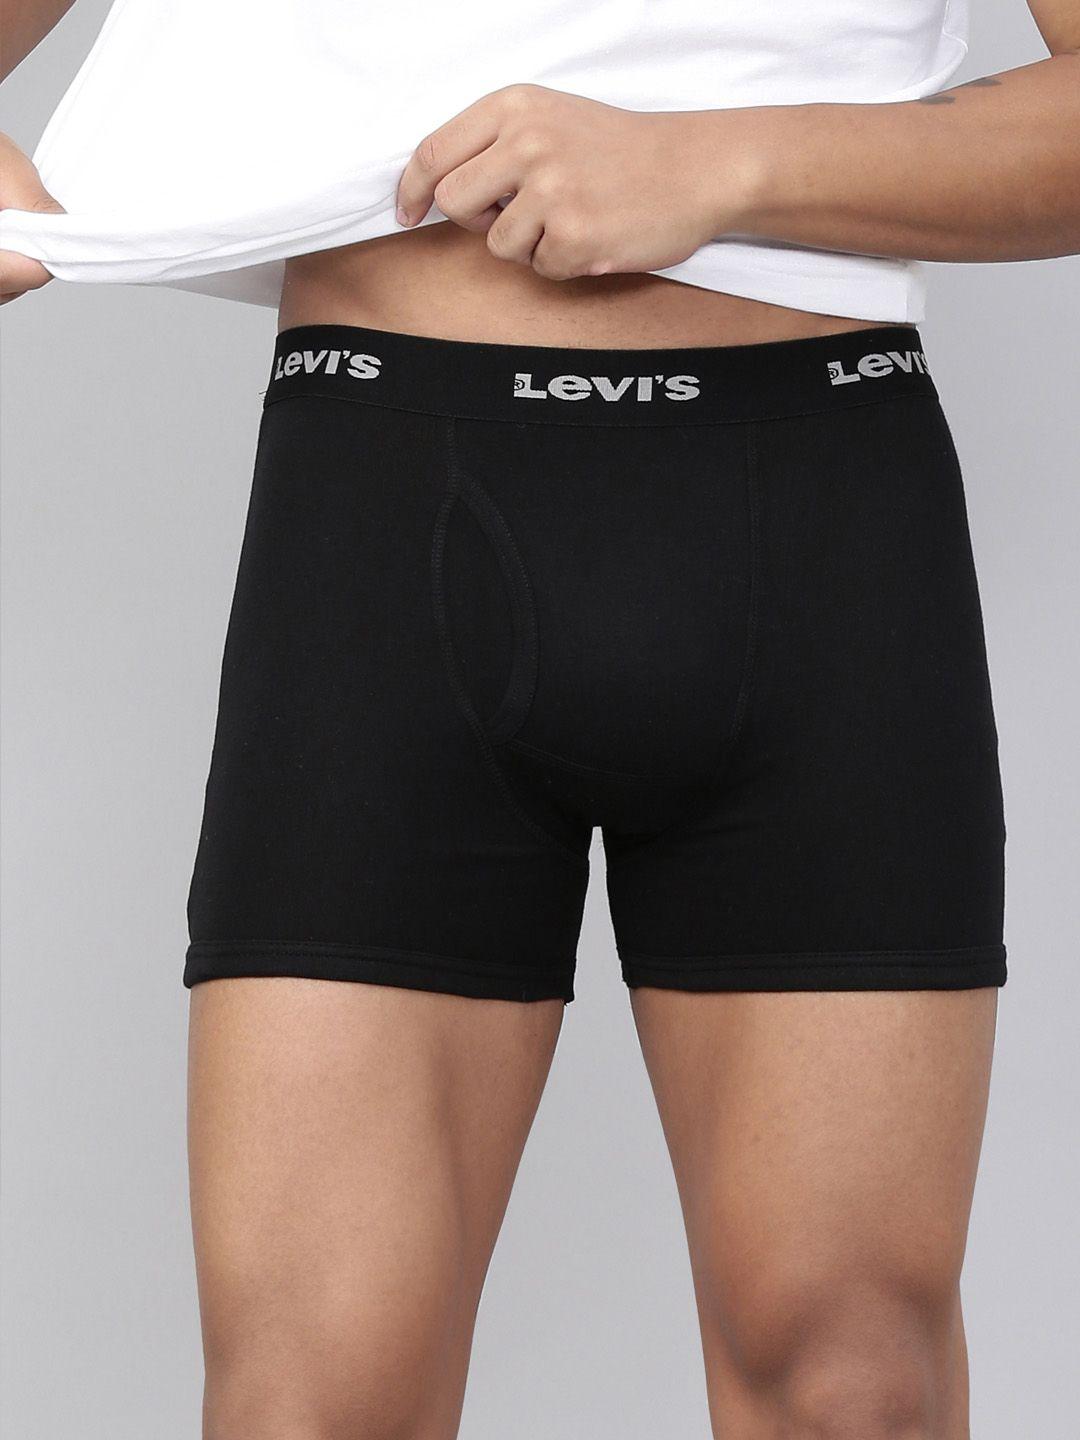 Levis Smartskin Technology Cotton Trunks with Tag Free Comfort #001-BOXER BRIEF